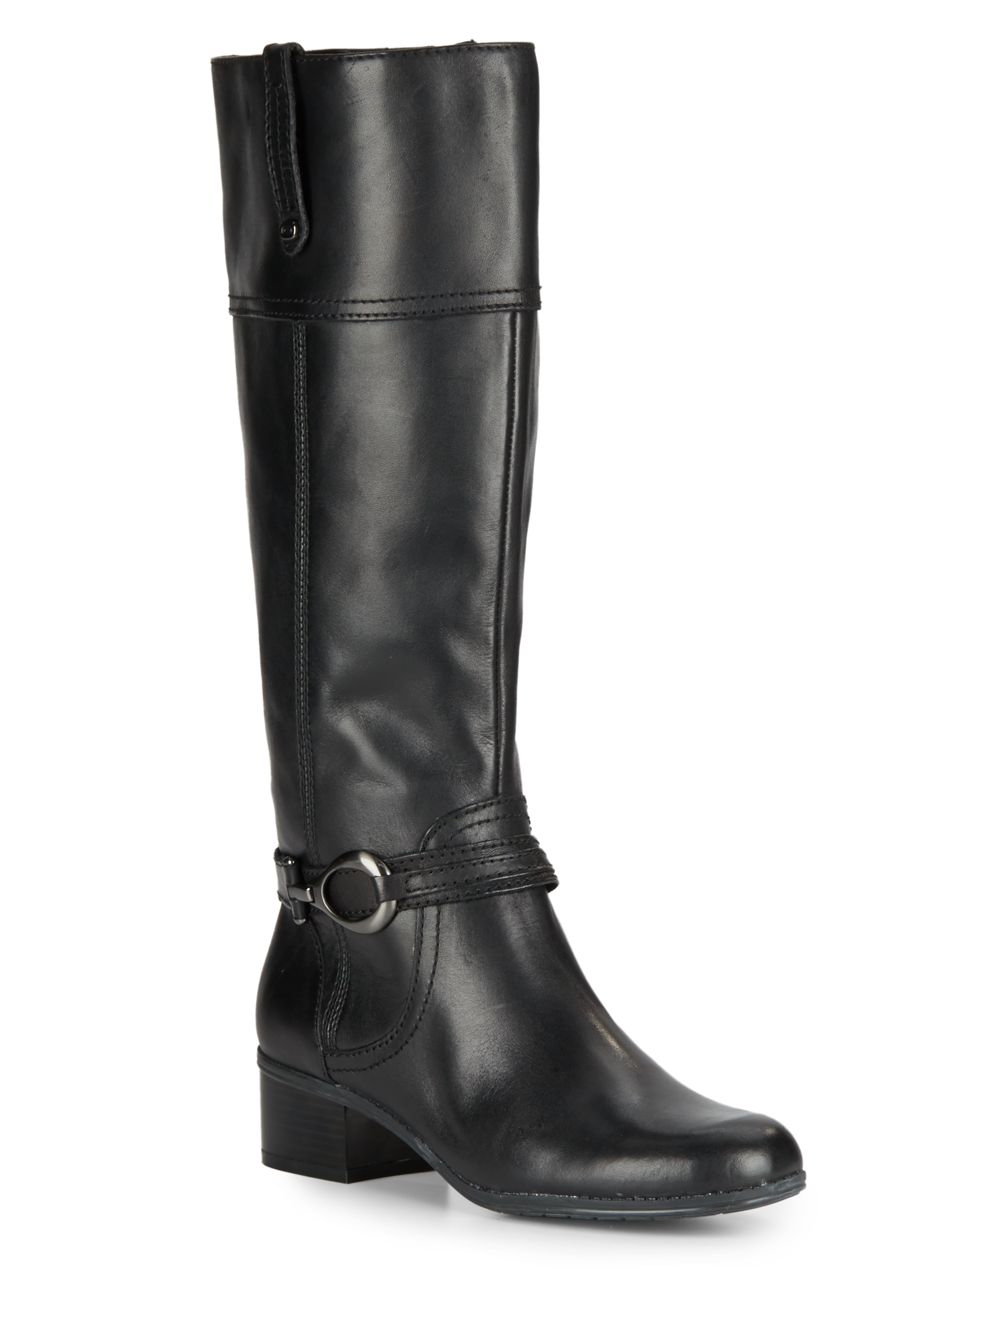 Bandolino Carlyle Leather Tall Boots in Black | Lyst